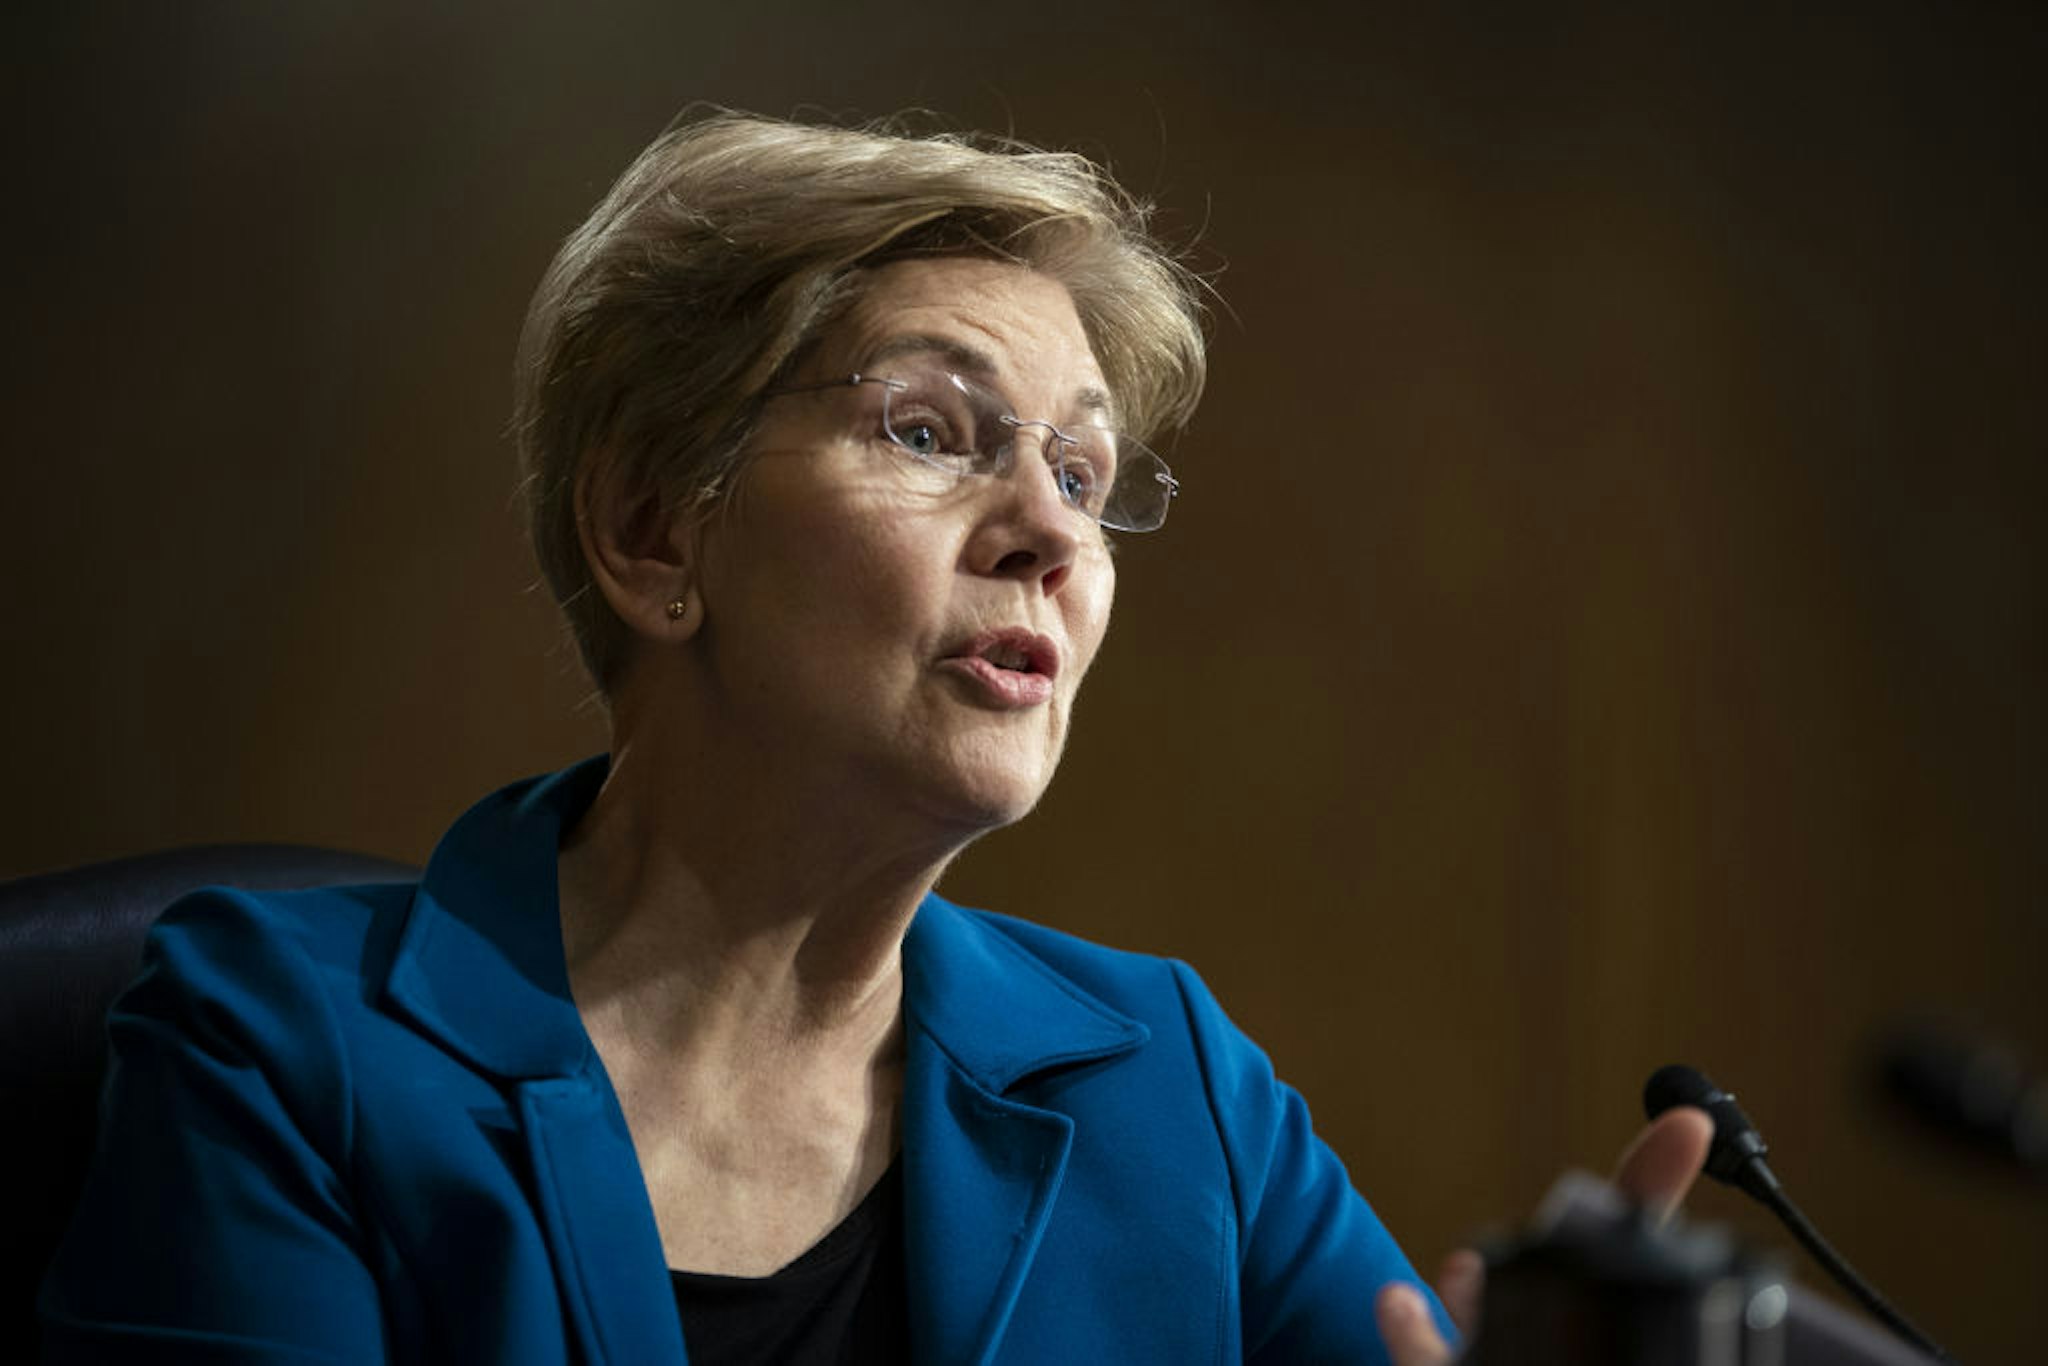 Senator Elizabeth Warren, a Democrat from Massachusetts, questions Lael Brainard, governor of the U.S. Federal Reserve, not pictured, during a Senate Banking, Housing, and Urban Affairs Committee confirmation hearing in Washington, D.C., U.S., on Thursday, Jan. 13, 2022. Brainard, nominated by President Biden to serve as Fed vice chair, said tackling inflation and getting it back down to 2% while sustaining an inclusive recovery is the U.S. central bank's most pressing task. Photographer: Al Drago/Bloomberg via Getty Images